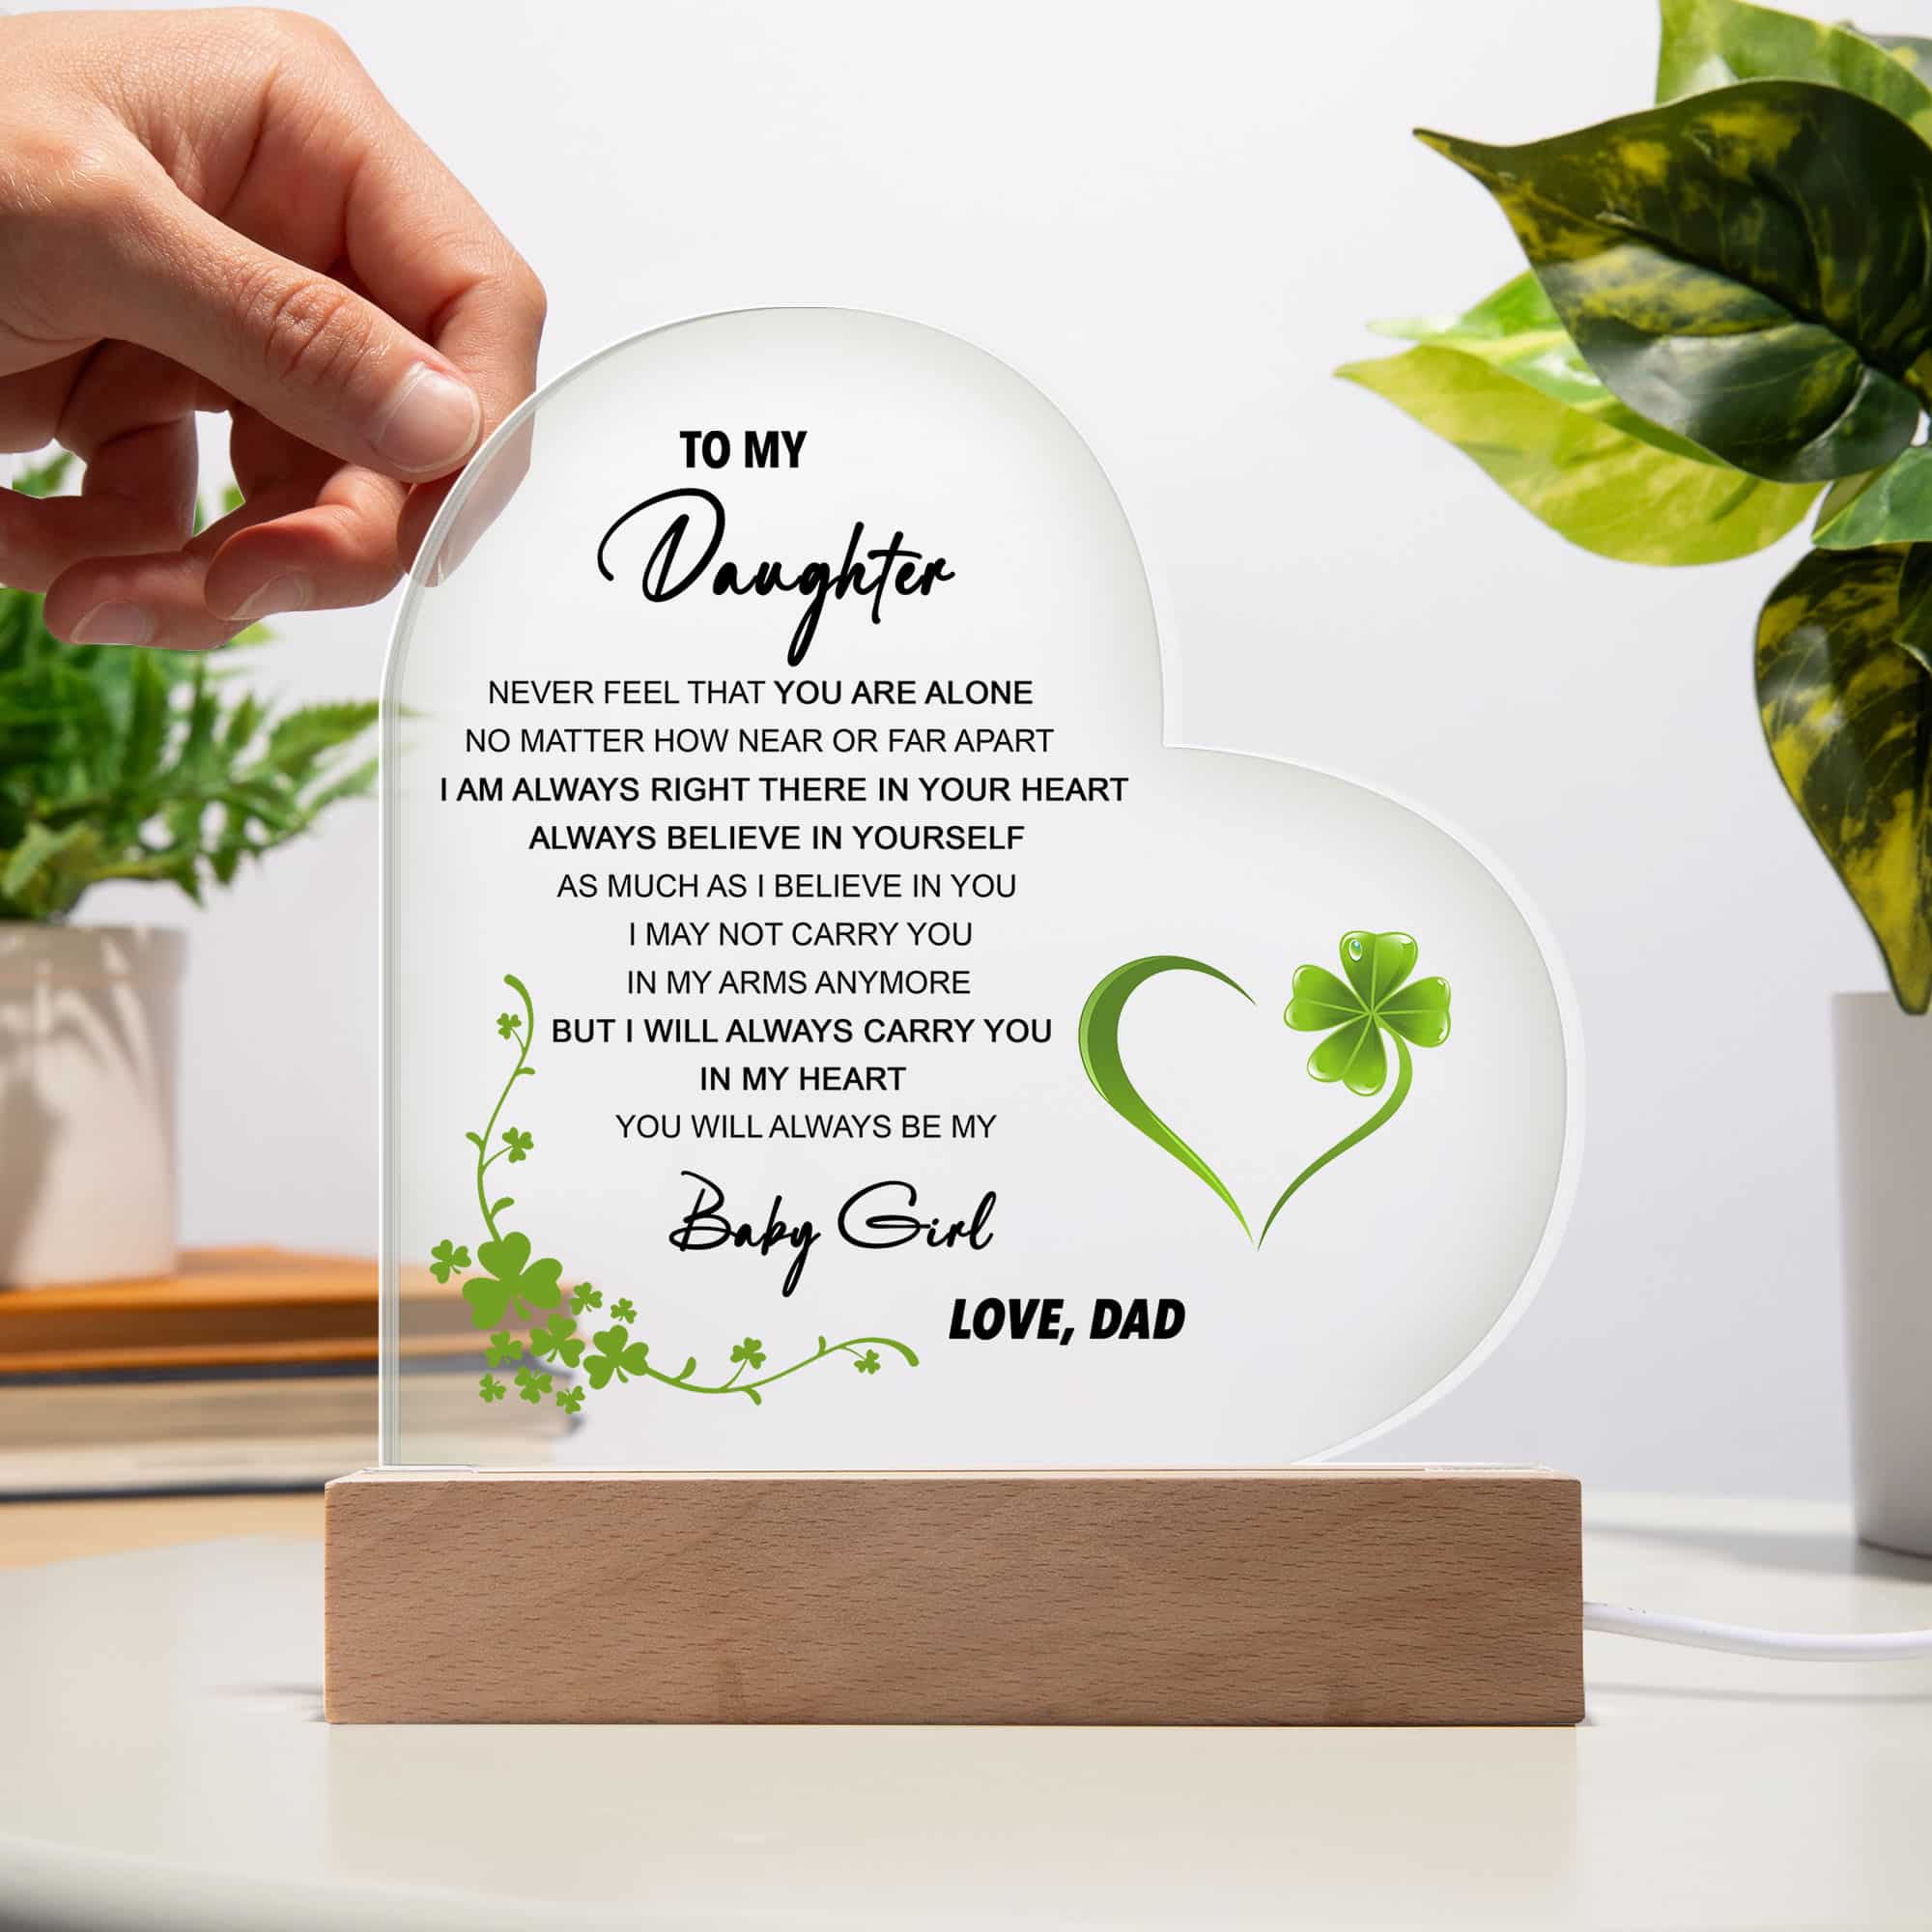 Acrylic Heart Plaque From Dad Touching Message To Daughter - FavoJewelry